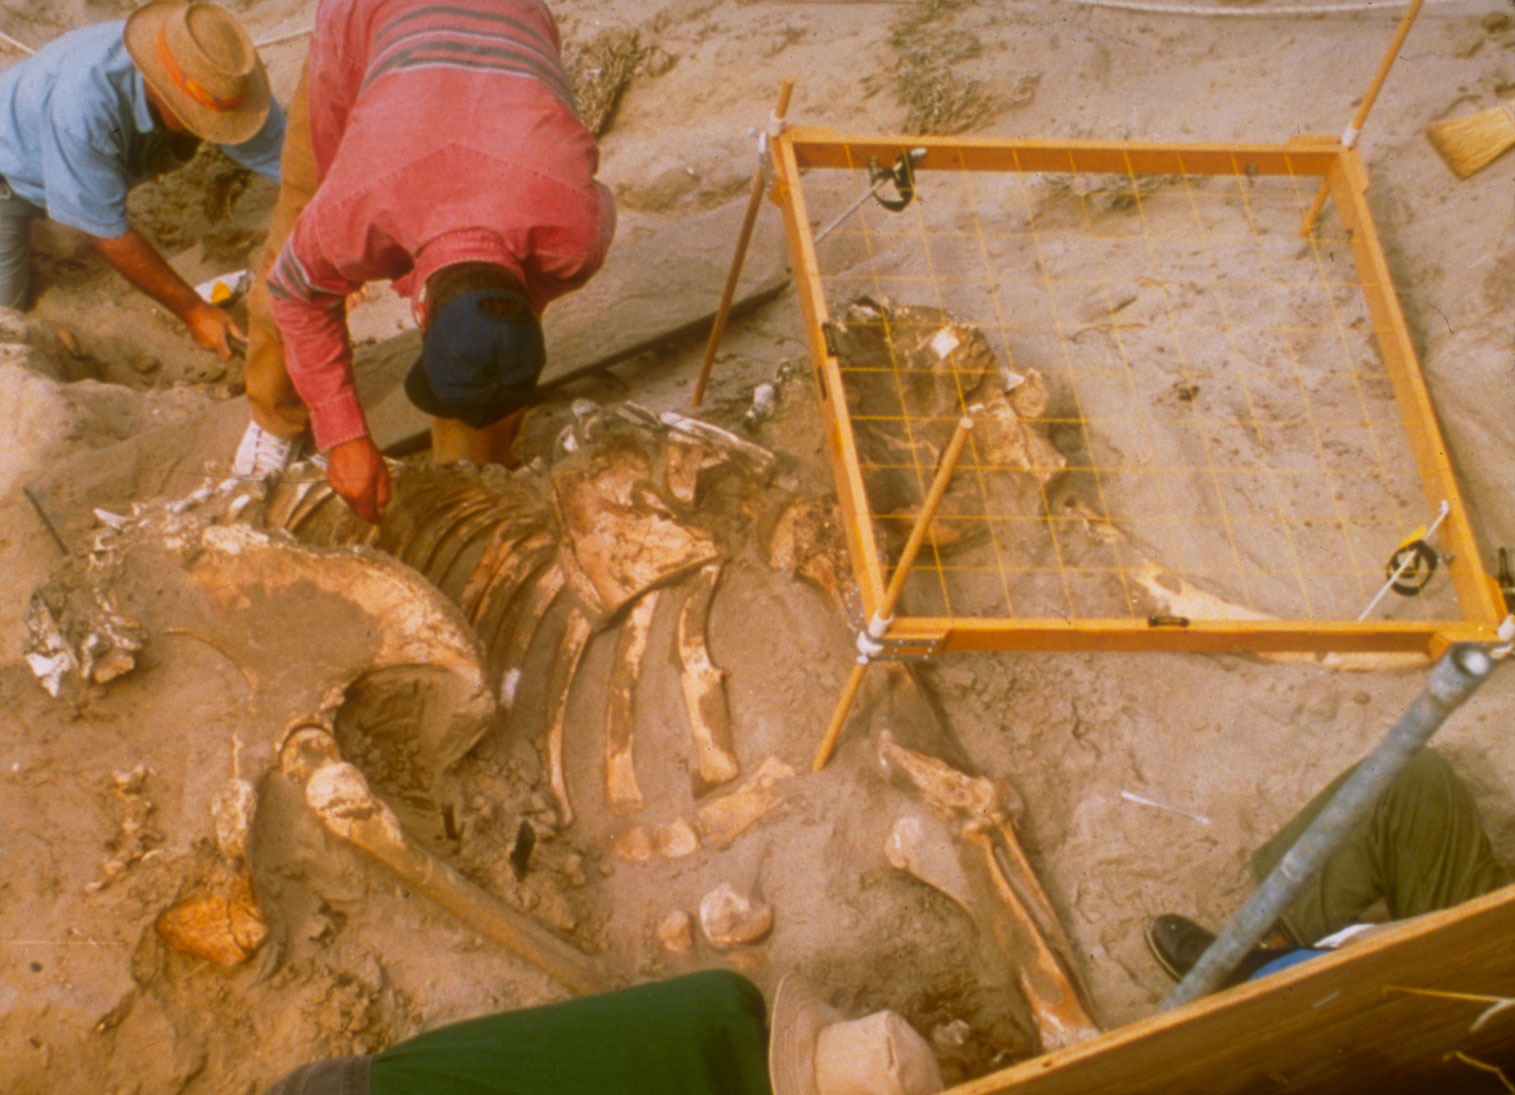 Photograph of a pygmy mammoth skeleton being excavated. The mammoth is preserved in a sand dune. Its skull with one tusk is on the right. Also visible are a front leg, shoulder bland, ribcage, pelvis, and femur. A grid on four poles has been placed over the mammoth skull. A man bends down over the skeleton and another man is kneeling behind him, partially obscured. In the foreground, a little of a third man can be seen.